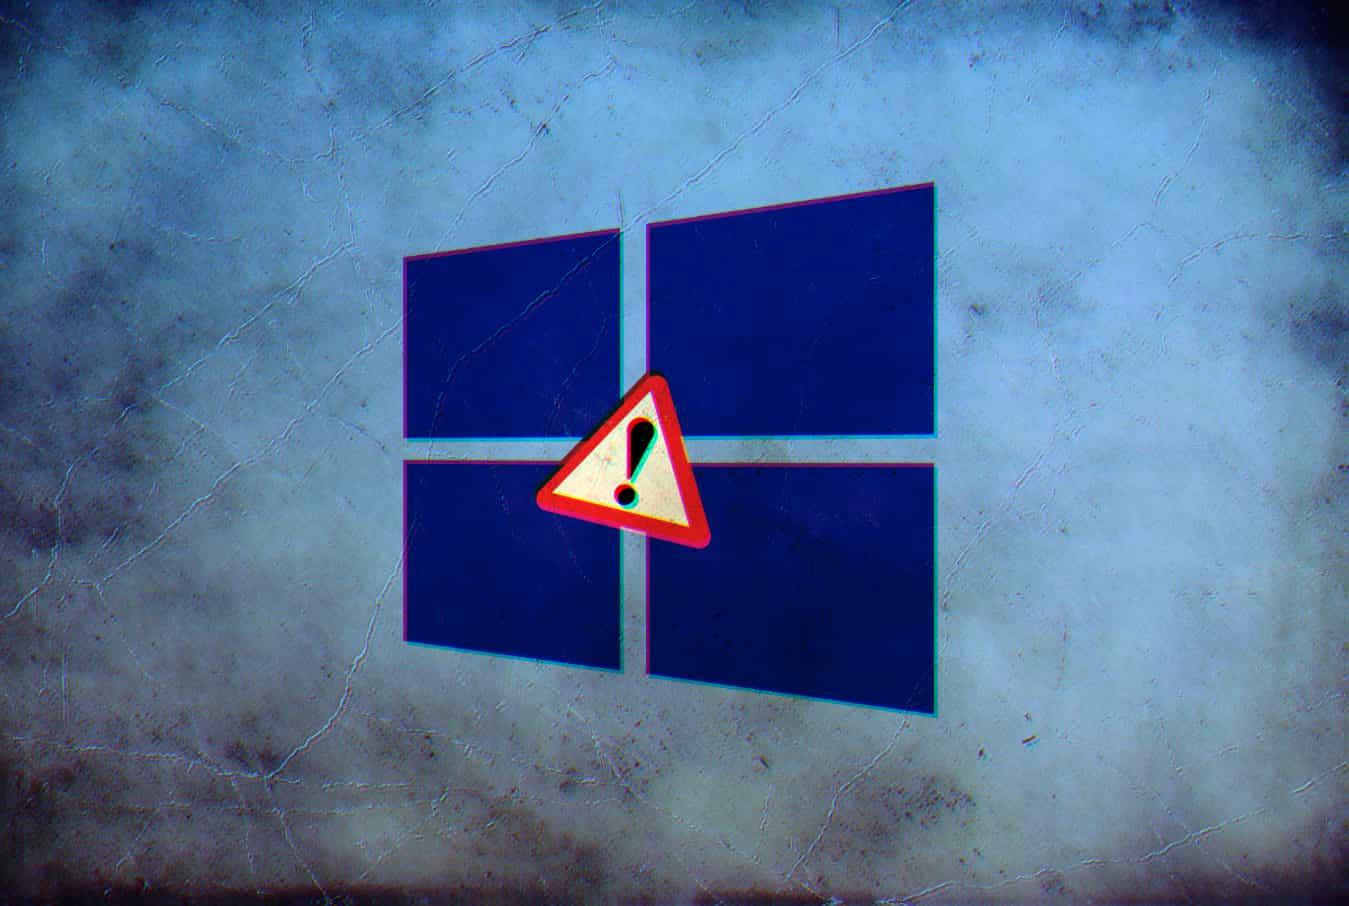 Hackers are exploiting a critical, unpatched flaw in Windows